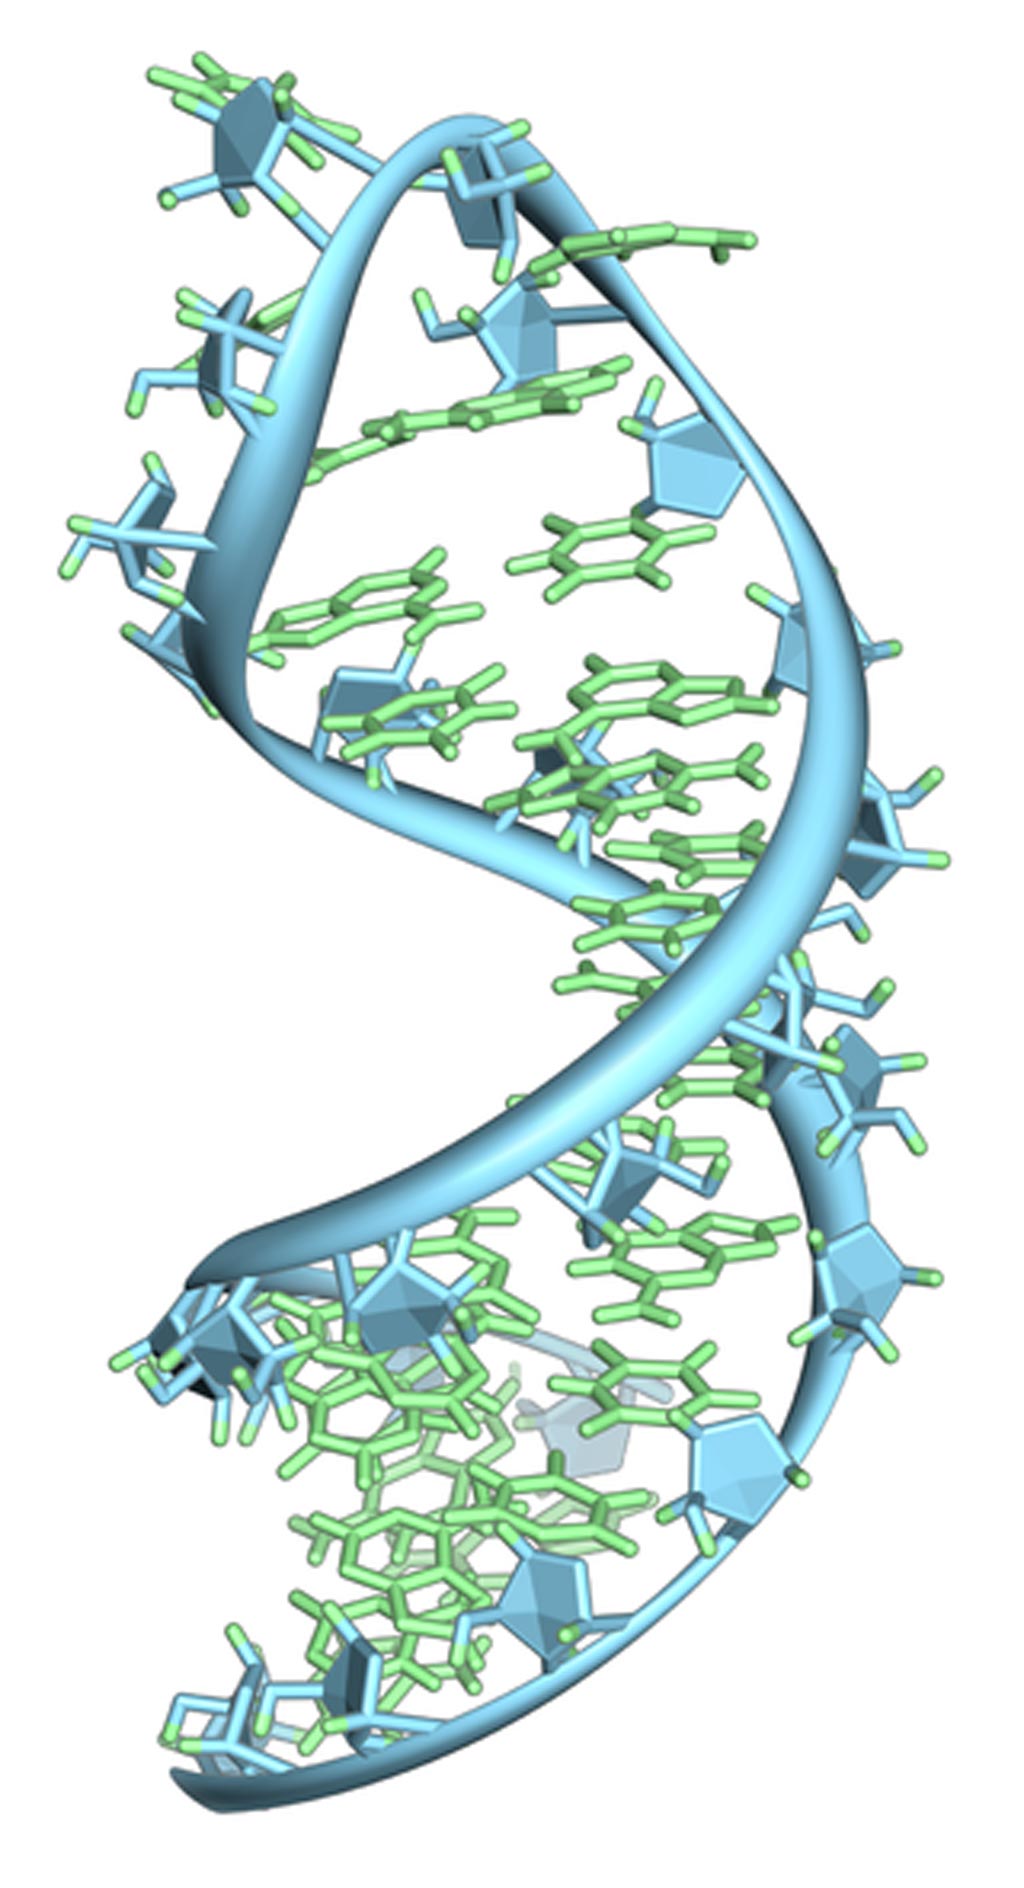 Image: A hairpin loop from a pre-mRNA. Highlighted are the nucleobases (green) and the ribose-phosphate backbone (blue). This is a single strand of RNA that folds back upon itself (Photo courtesy of Wikimedia Commons).